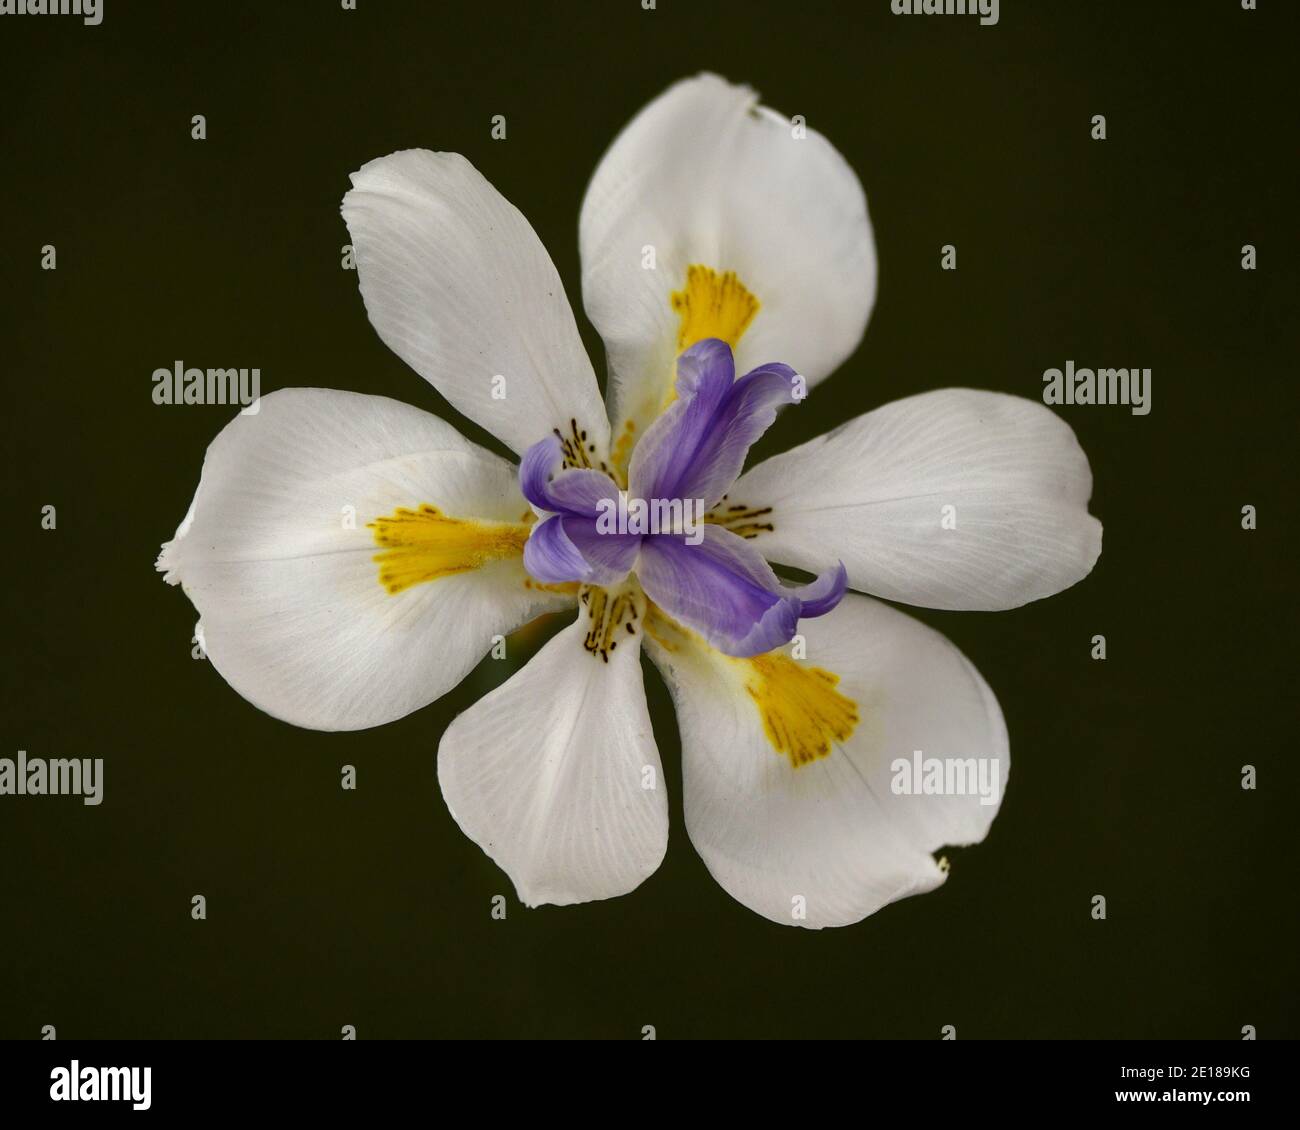 African Iris, Dietes iridioides, on black background, top view. This an ornamental plant in the Iridaceae family the flowers last only one day. Stock Photo